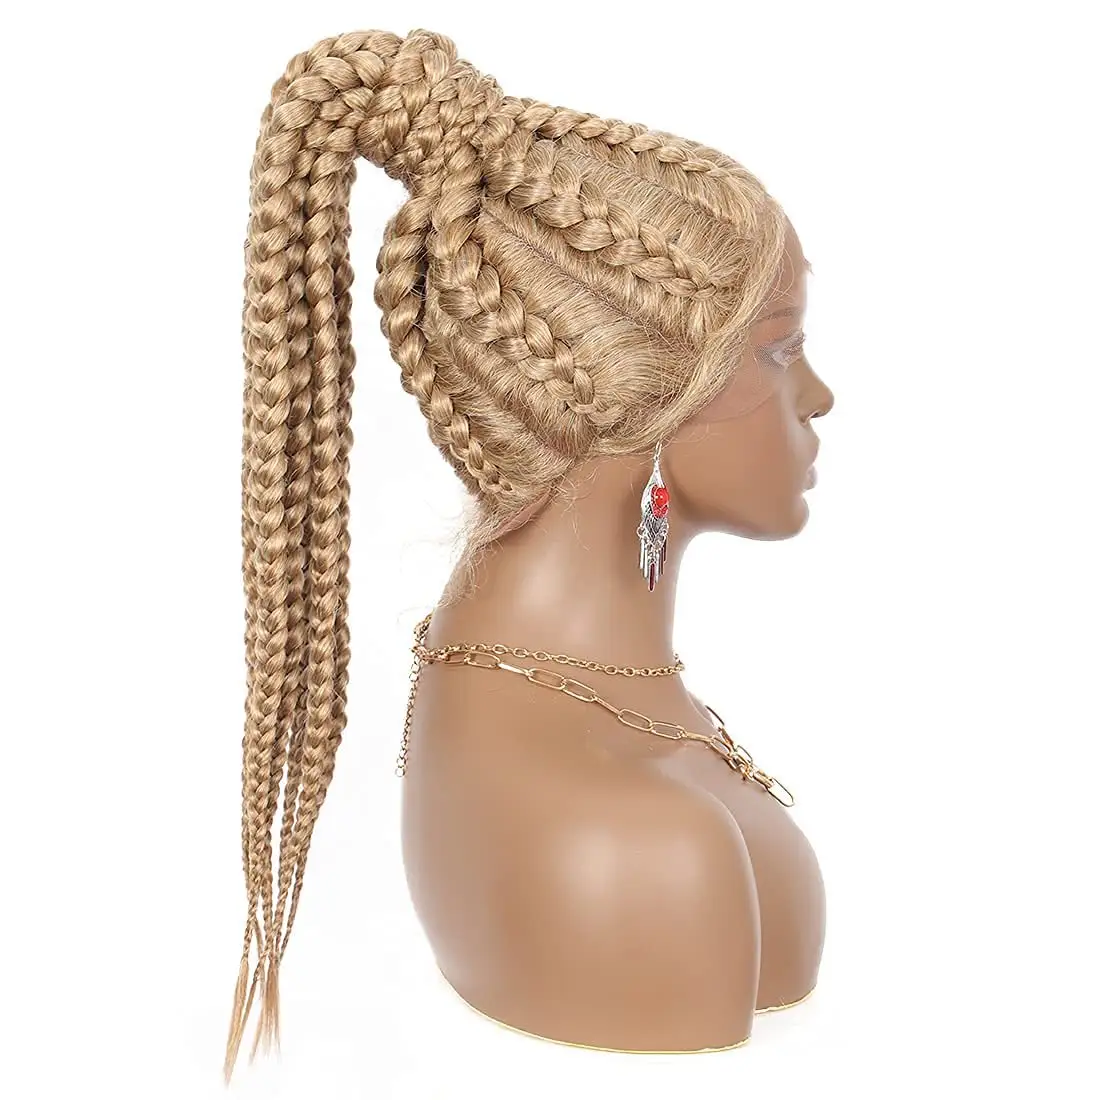 Amazon Hot Selling 8 Braid Hair Lace Frontal Wig For Black Women Box Braid Lace Frontal Wig African American Wig